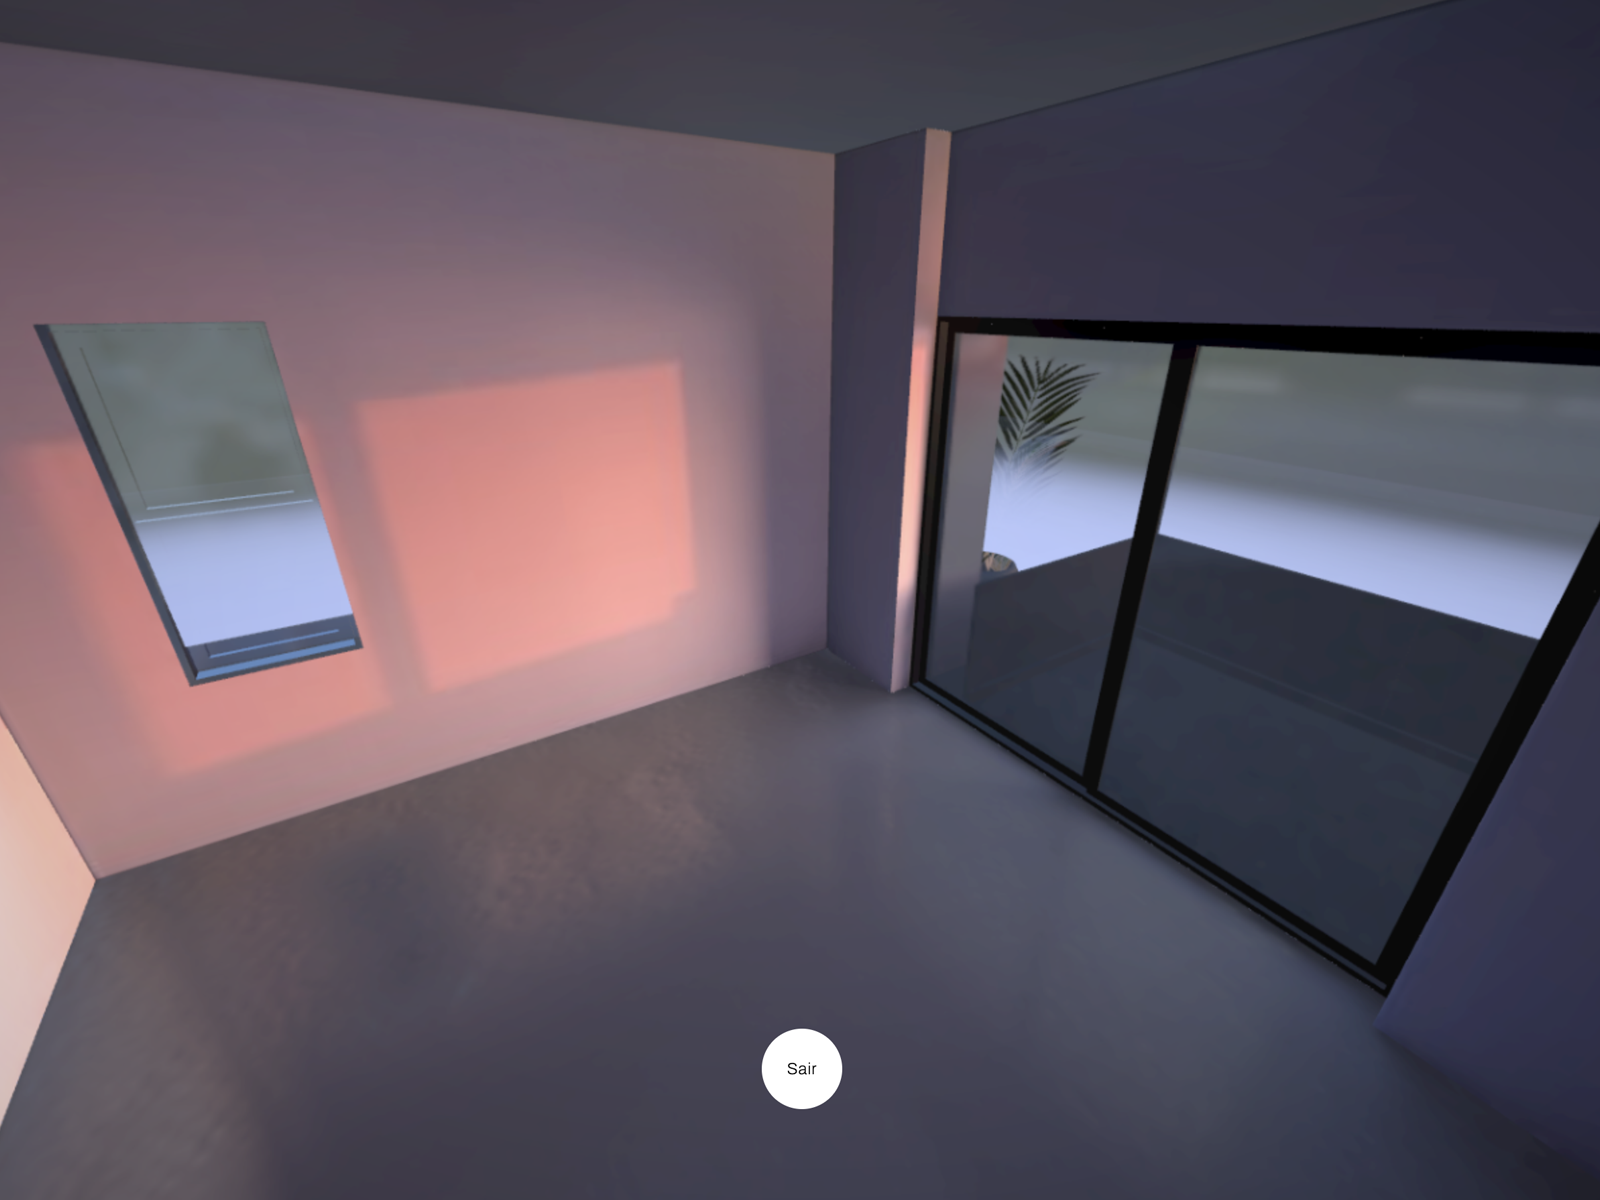 View interior with GLSL blurry reflections in threejs